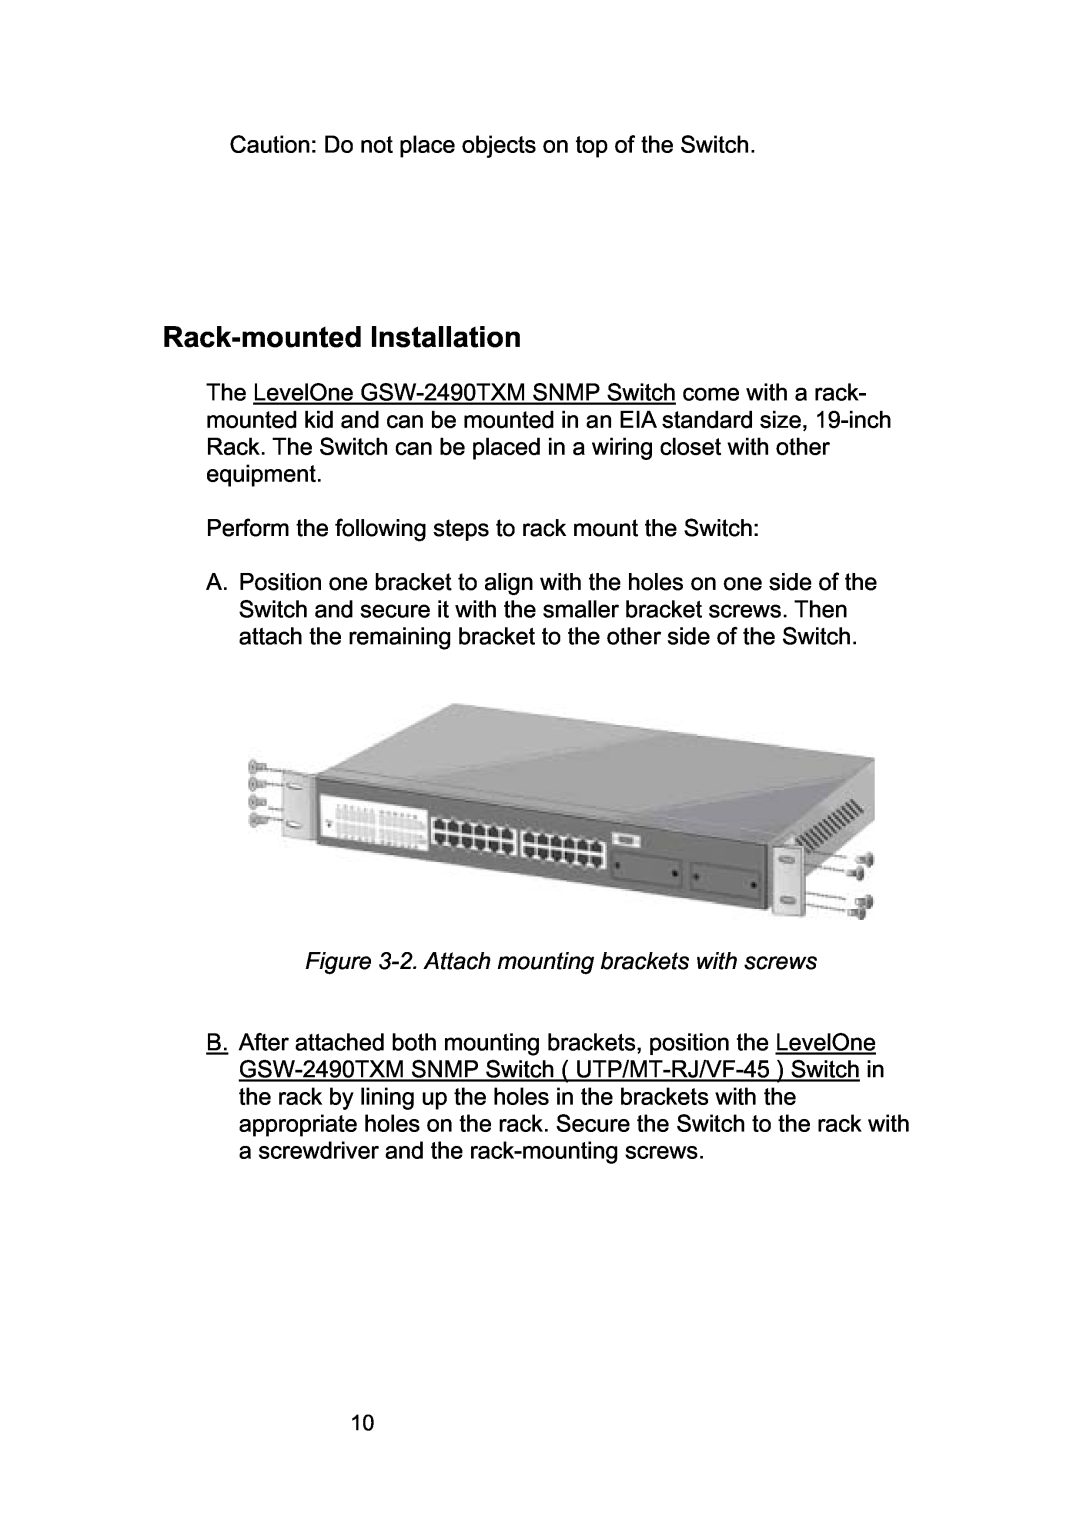 LevelOne GSW-2490TXM manual Rack-mounted Installation, 2. Attach mounting brackets with screws 